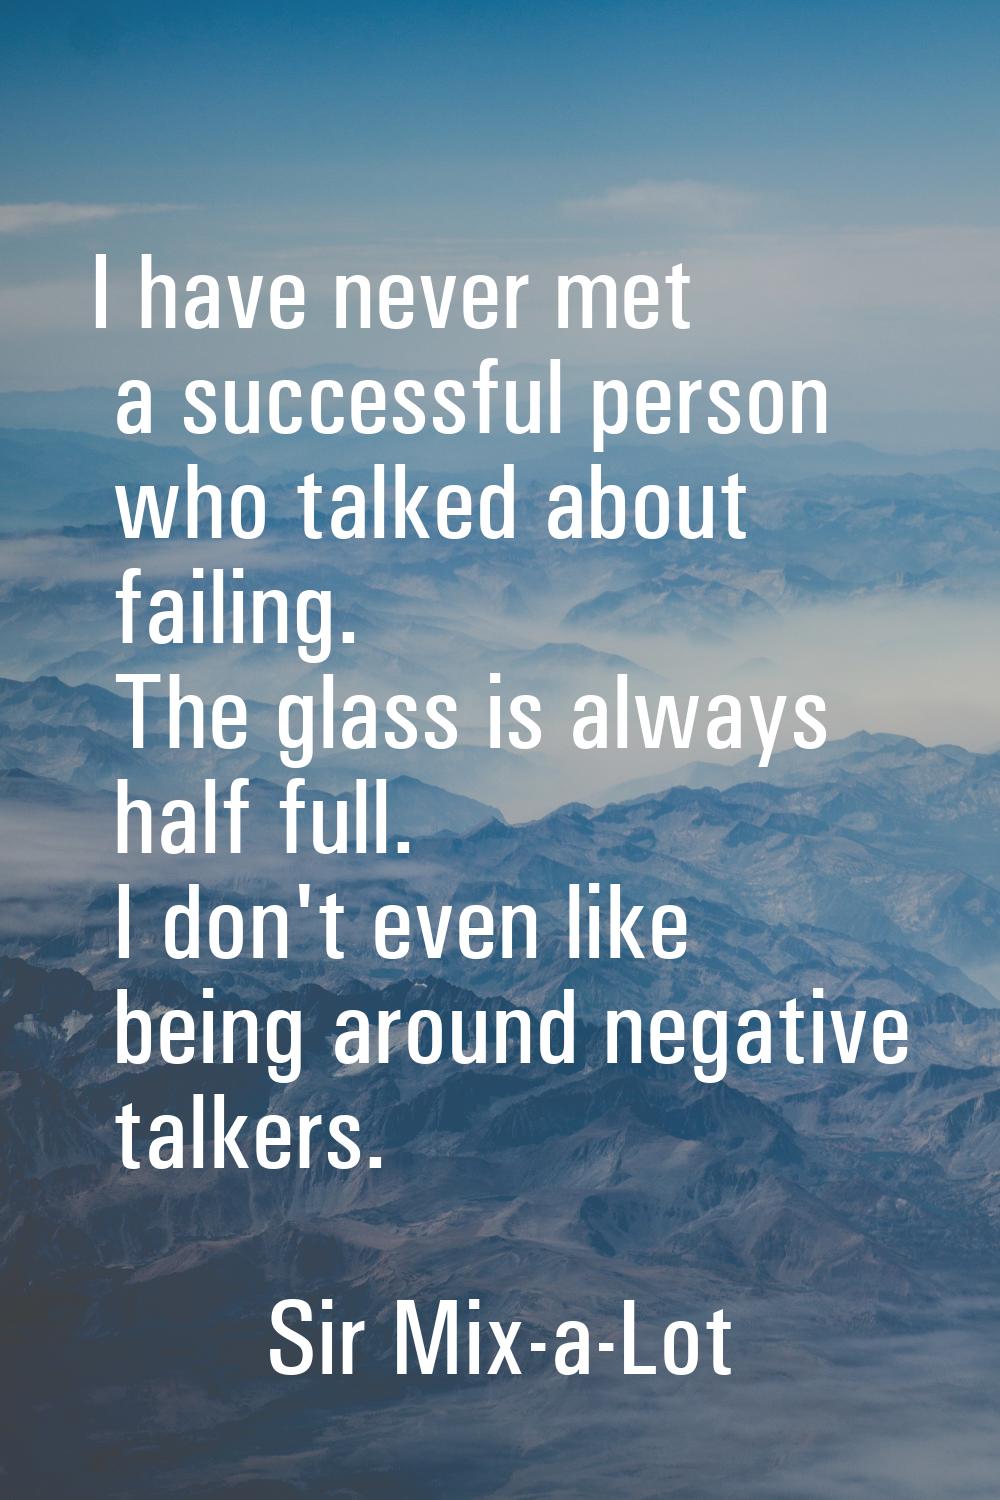 I have never met a successful person who talked about failing. The glass is always half full. I don